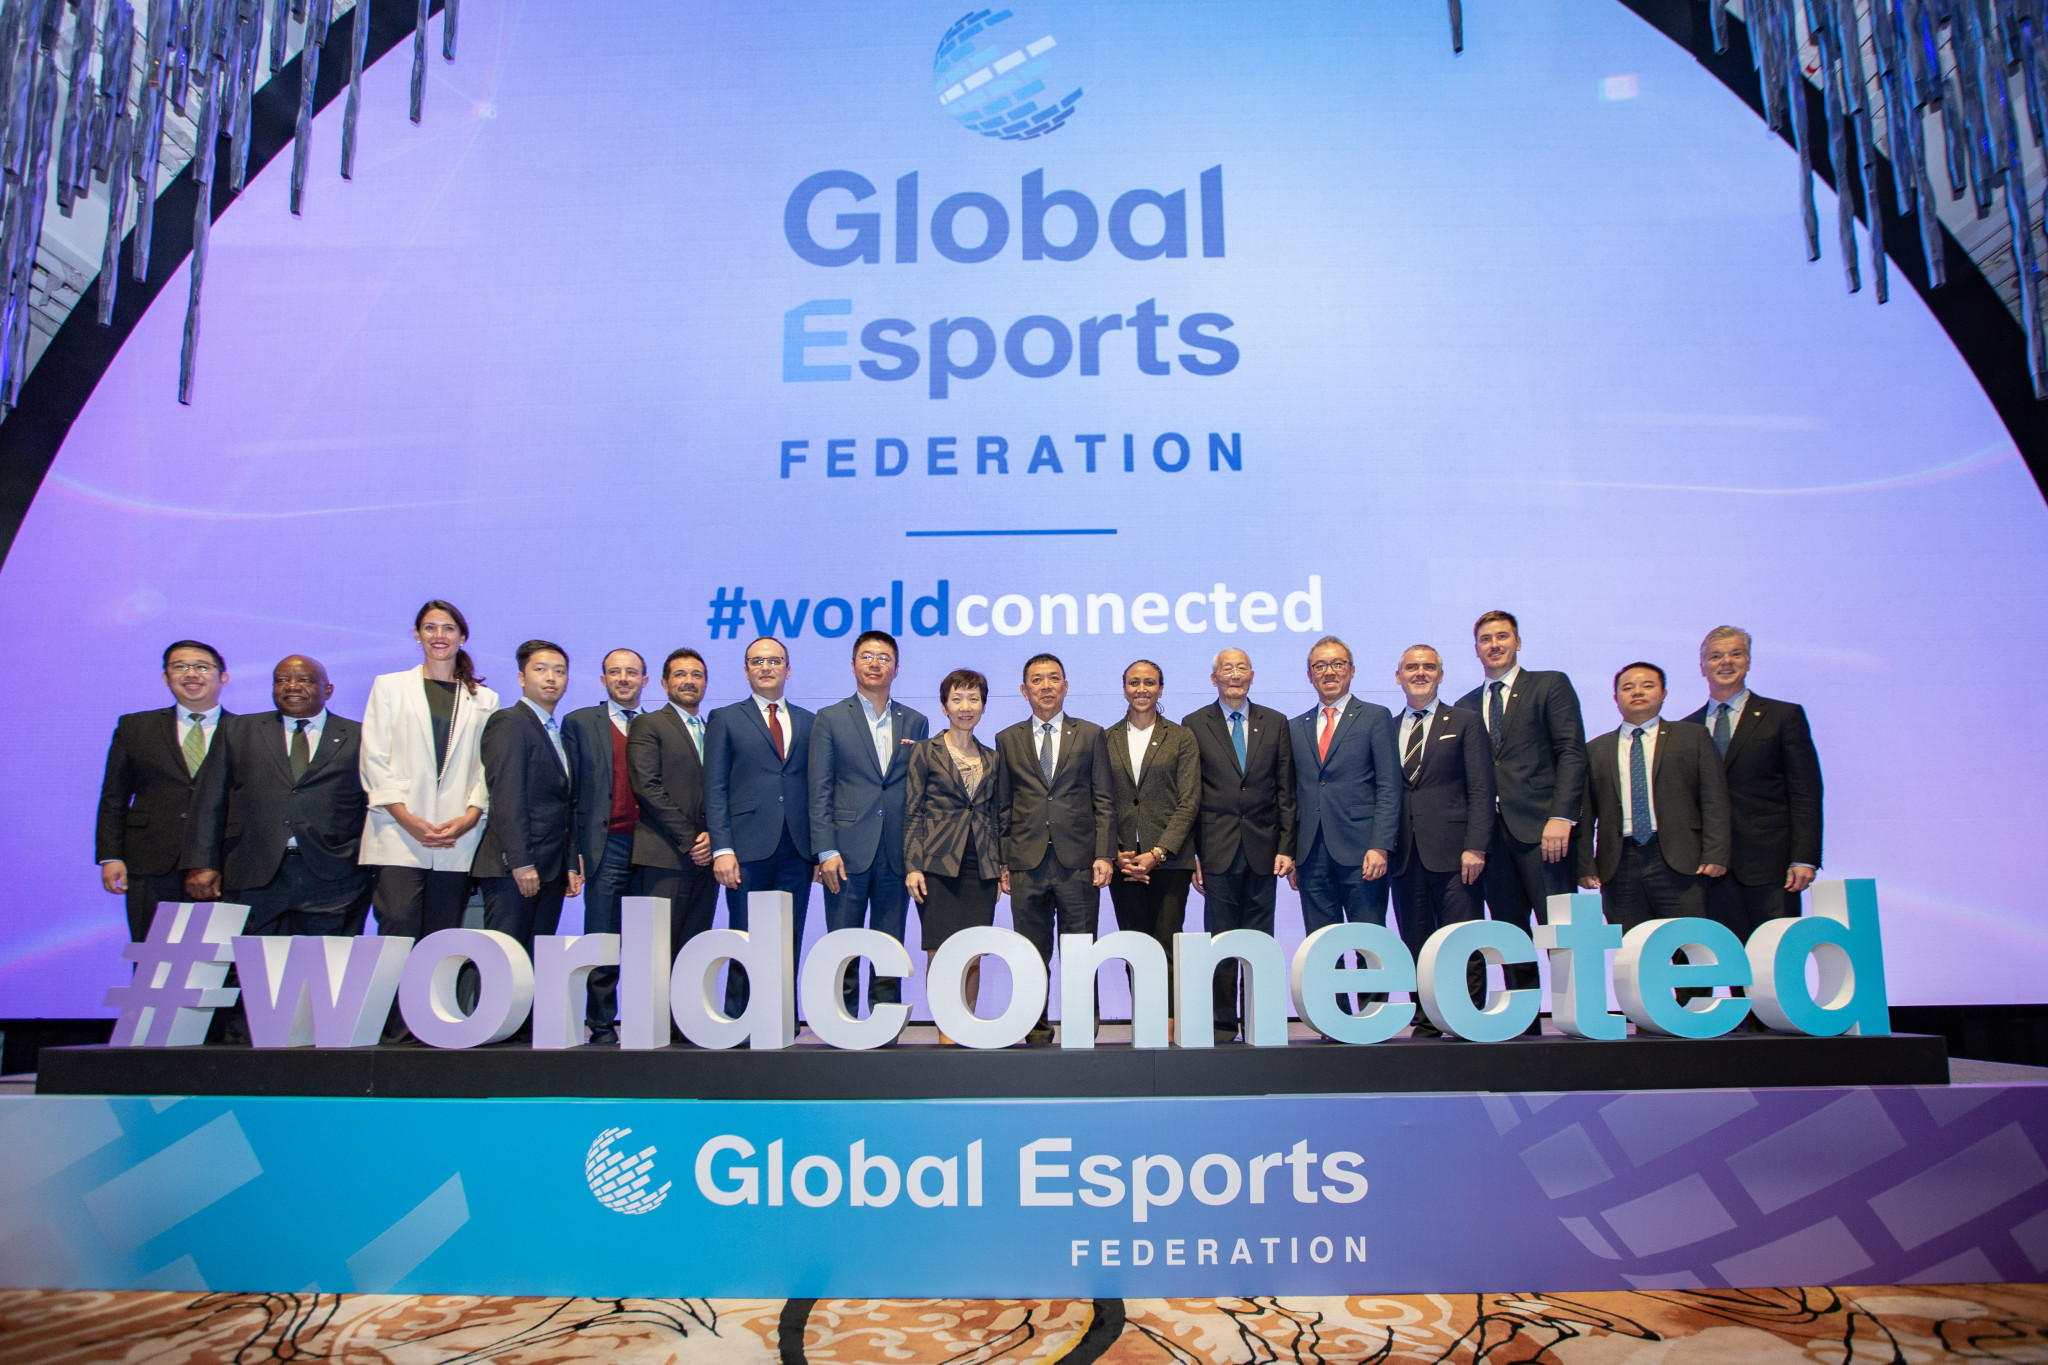 Global Esports Federation to mark one year anniversary with community initiative